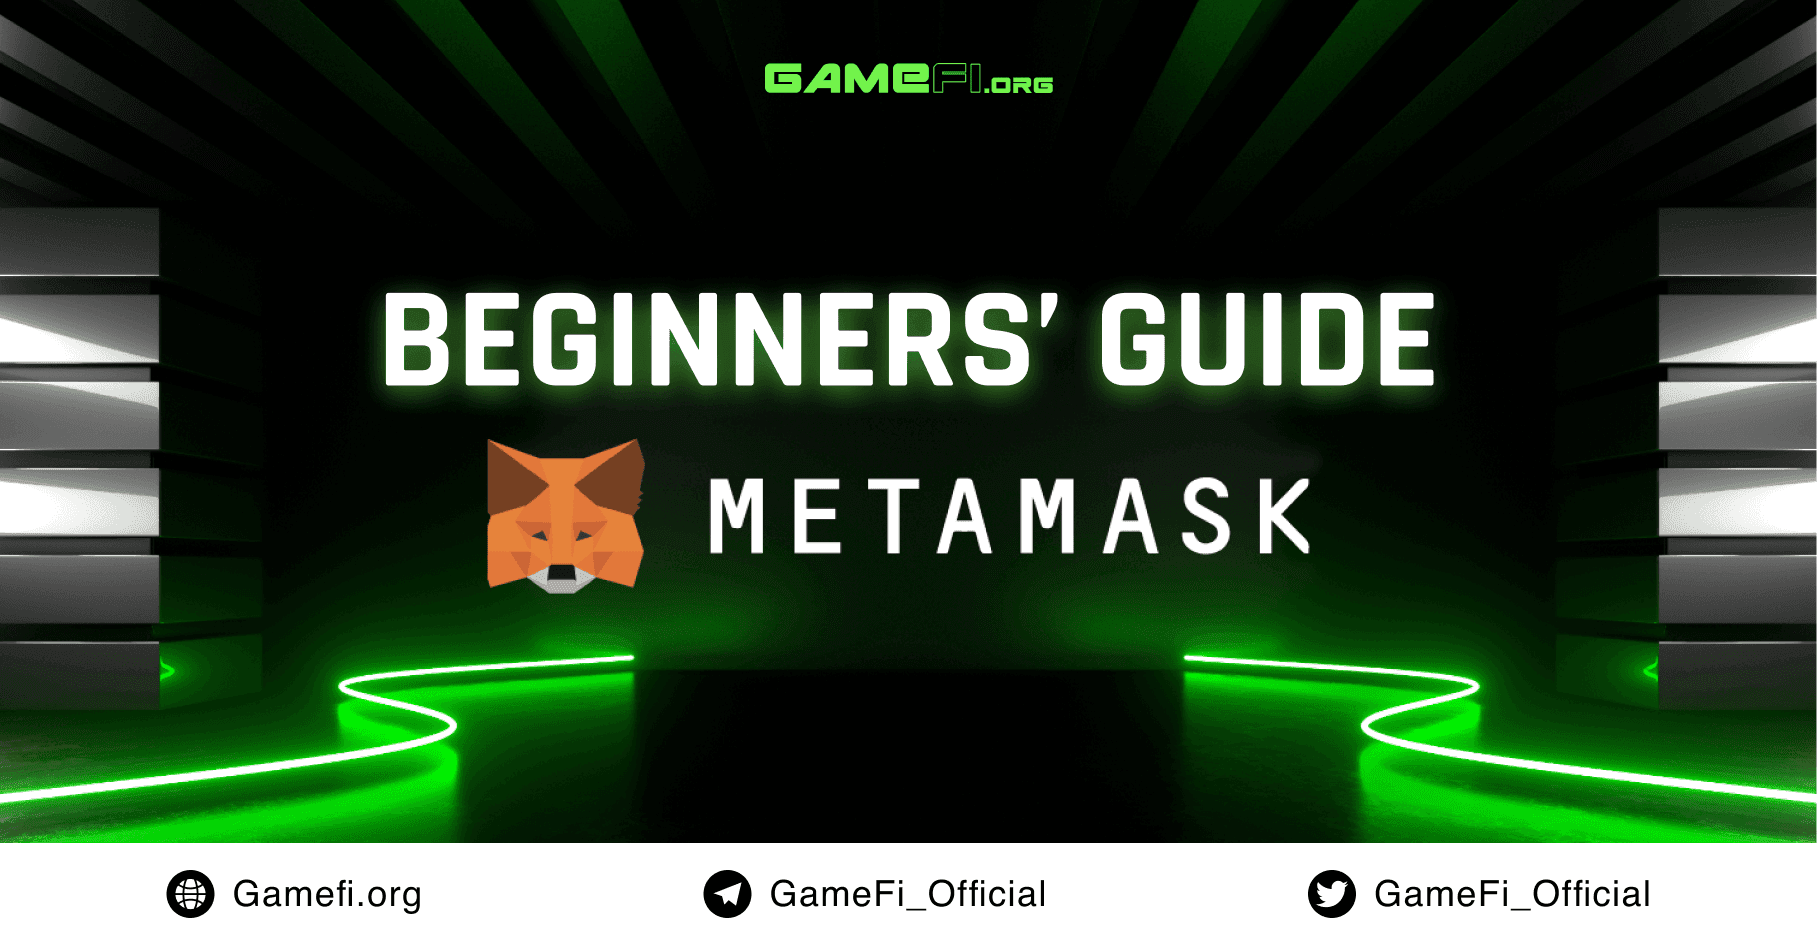 METAMASK - A GUIDE FOR BEGINNERS